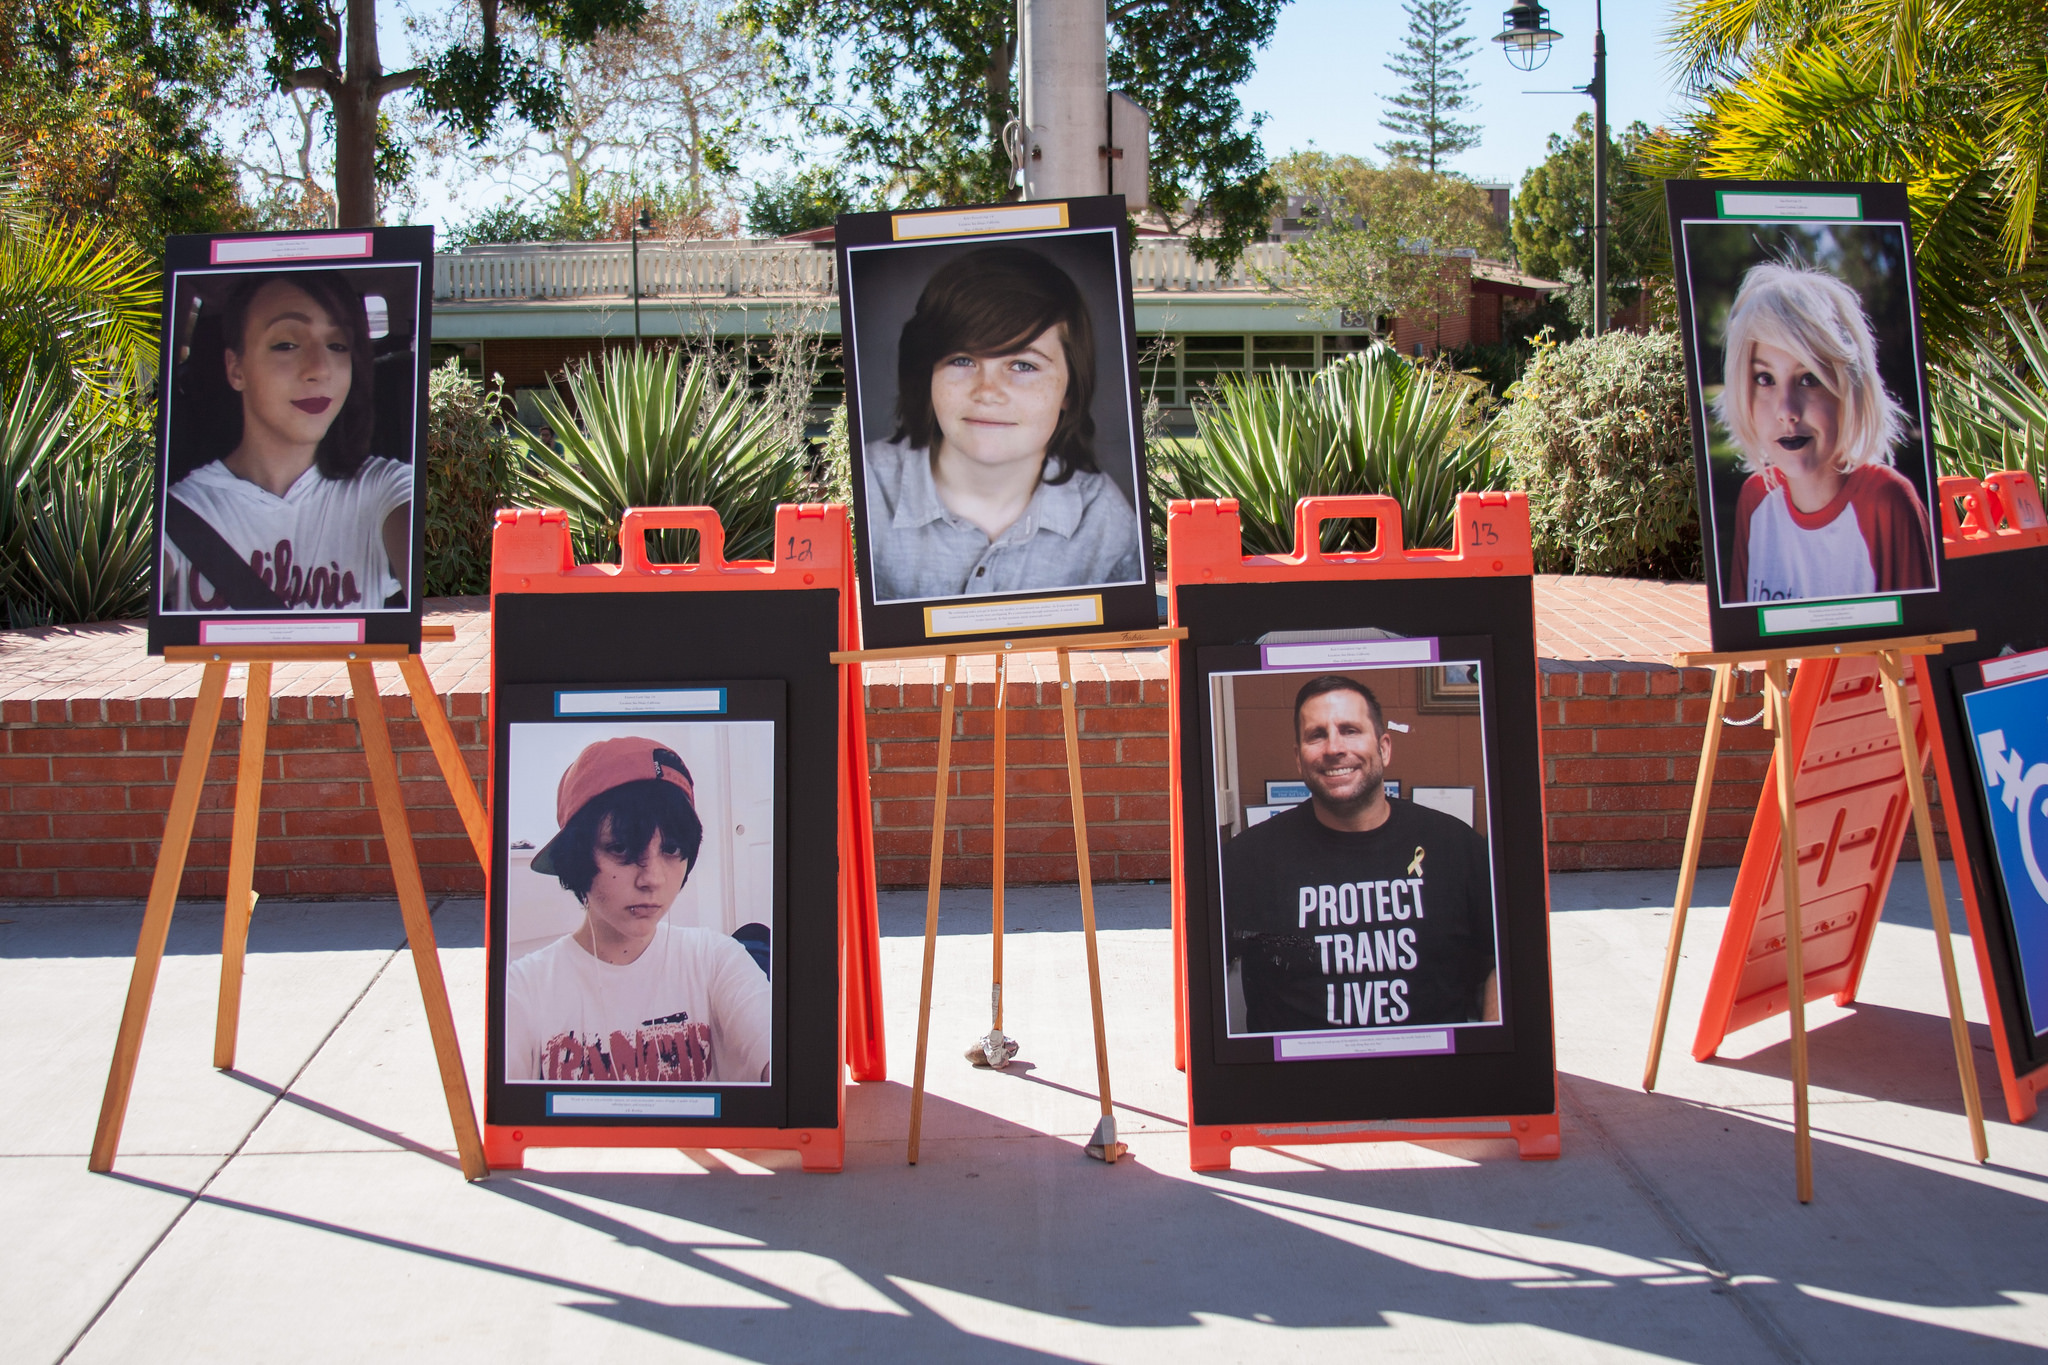 Photographs were displayed in the quad in memory of people who have died as consequence of intolerance toward transgender people. (Claudia Rodriguez/The Telescope)